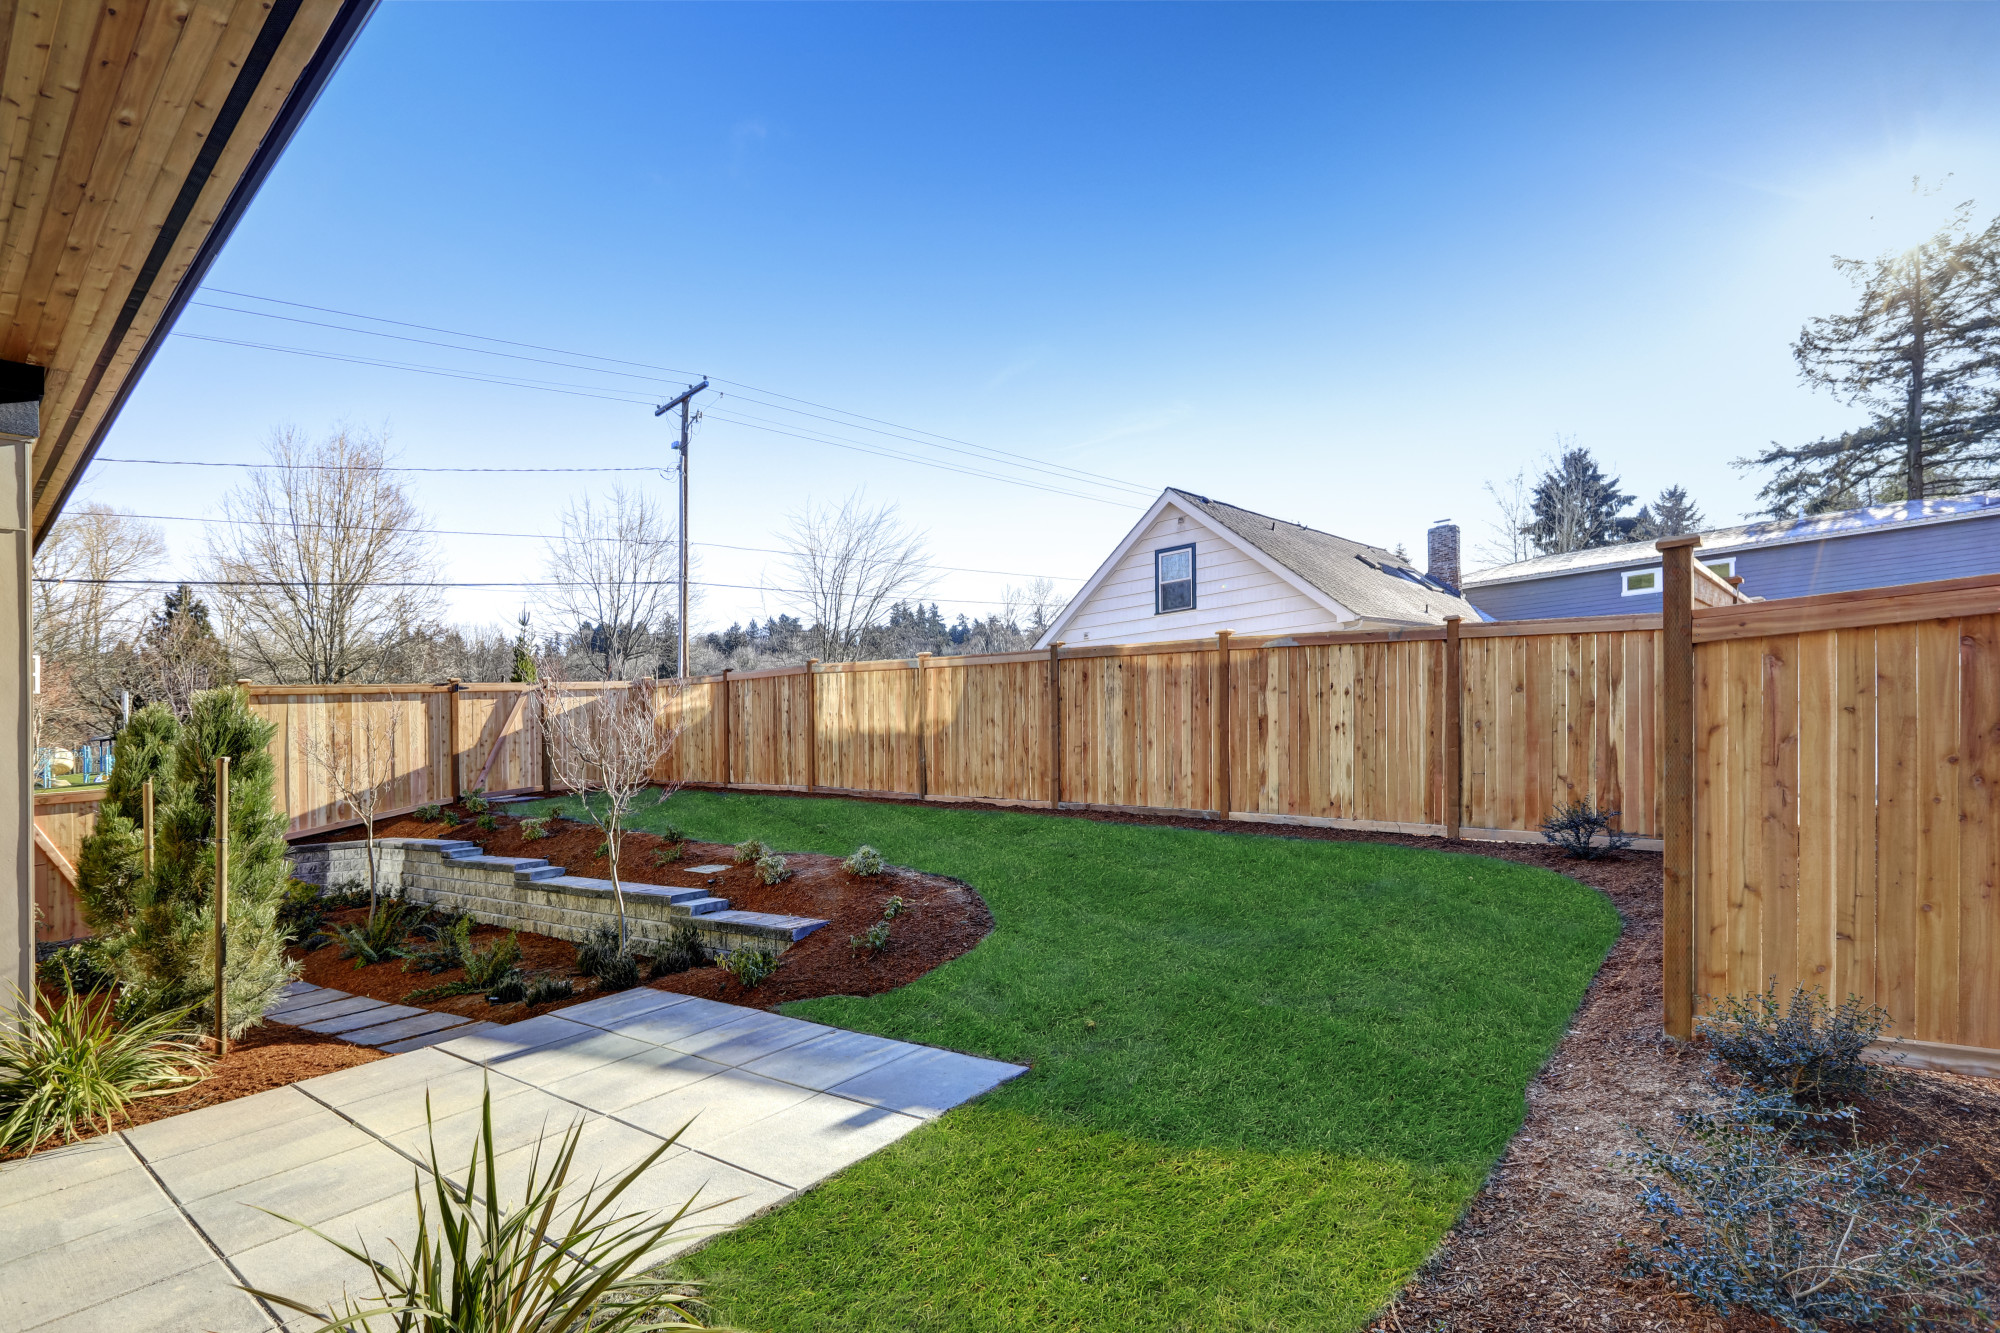 Reasons Why You Should Install a Fence Around Your Property